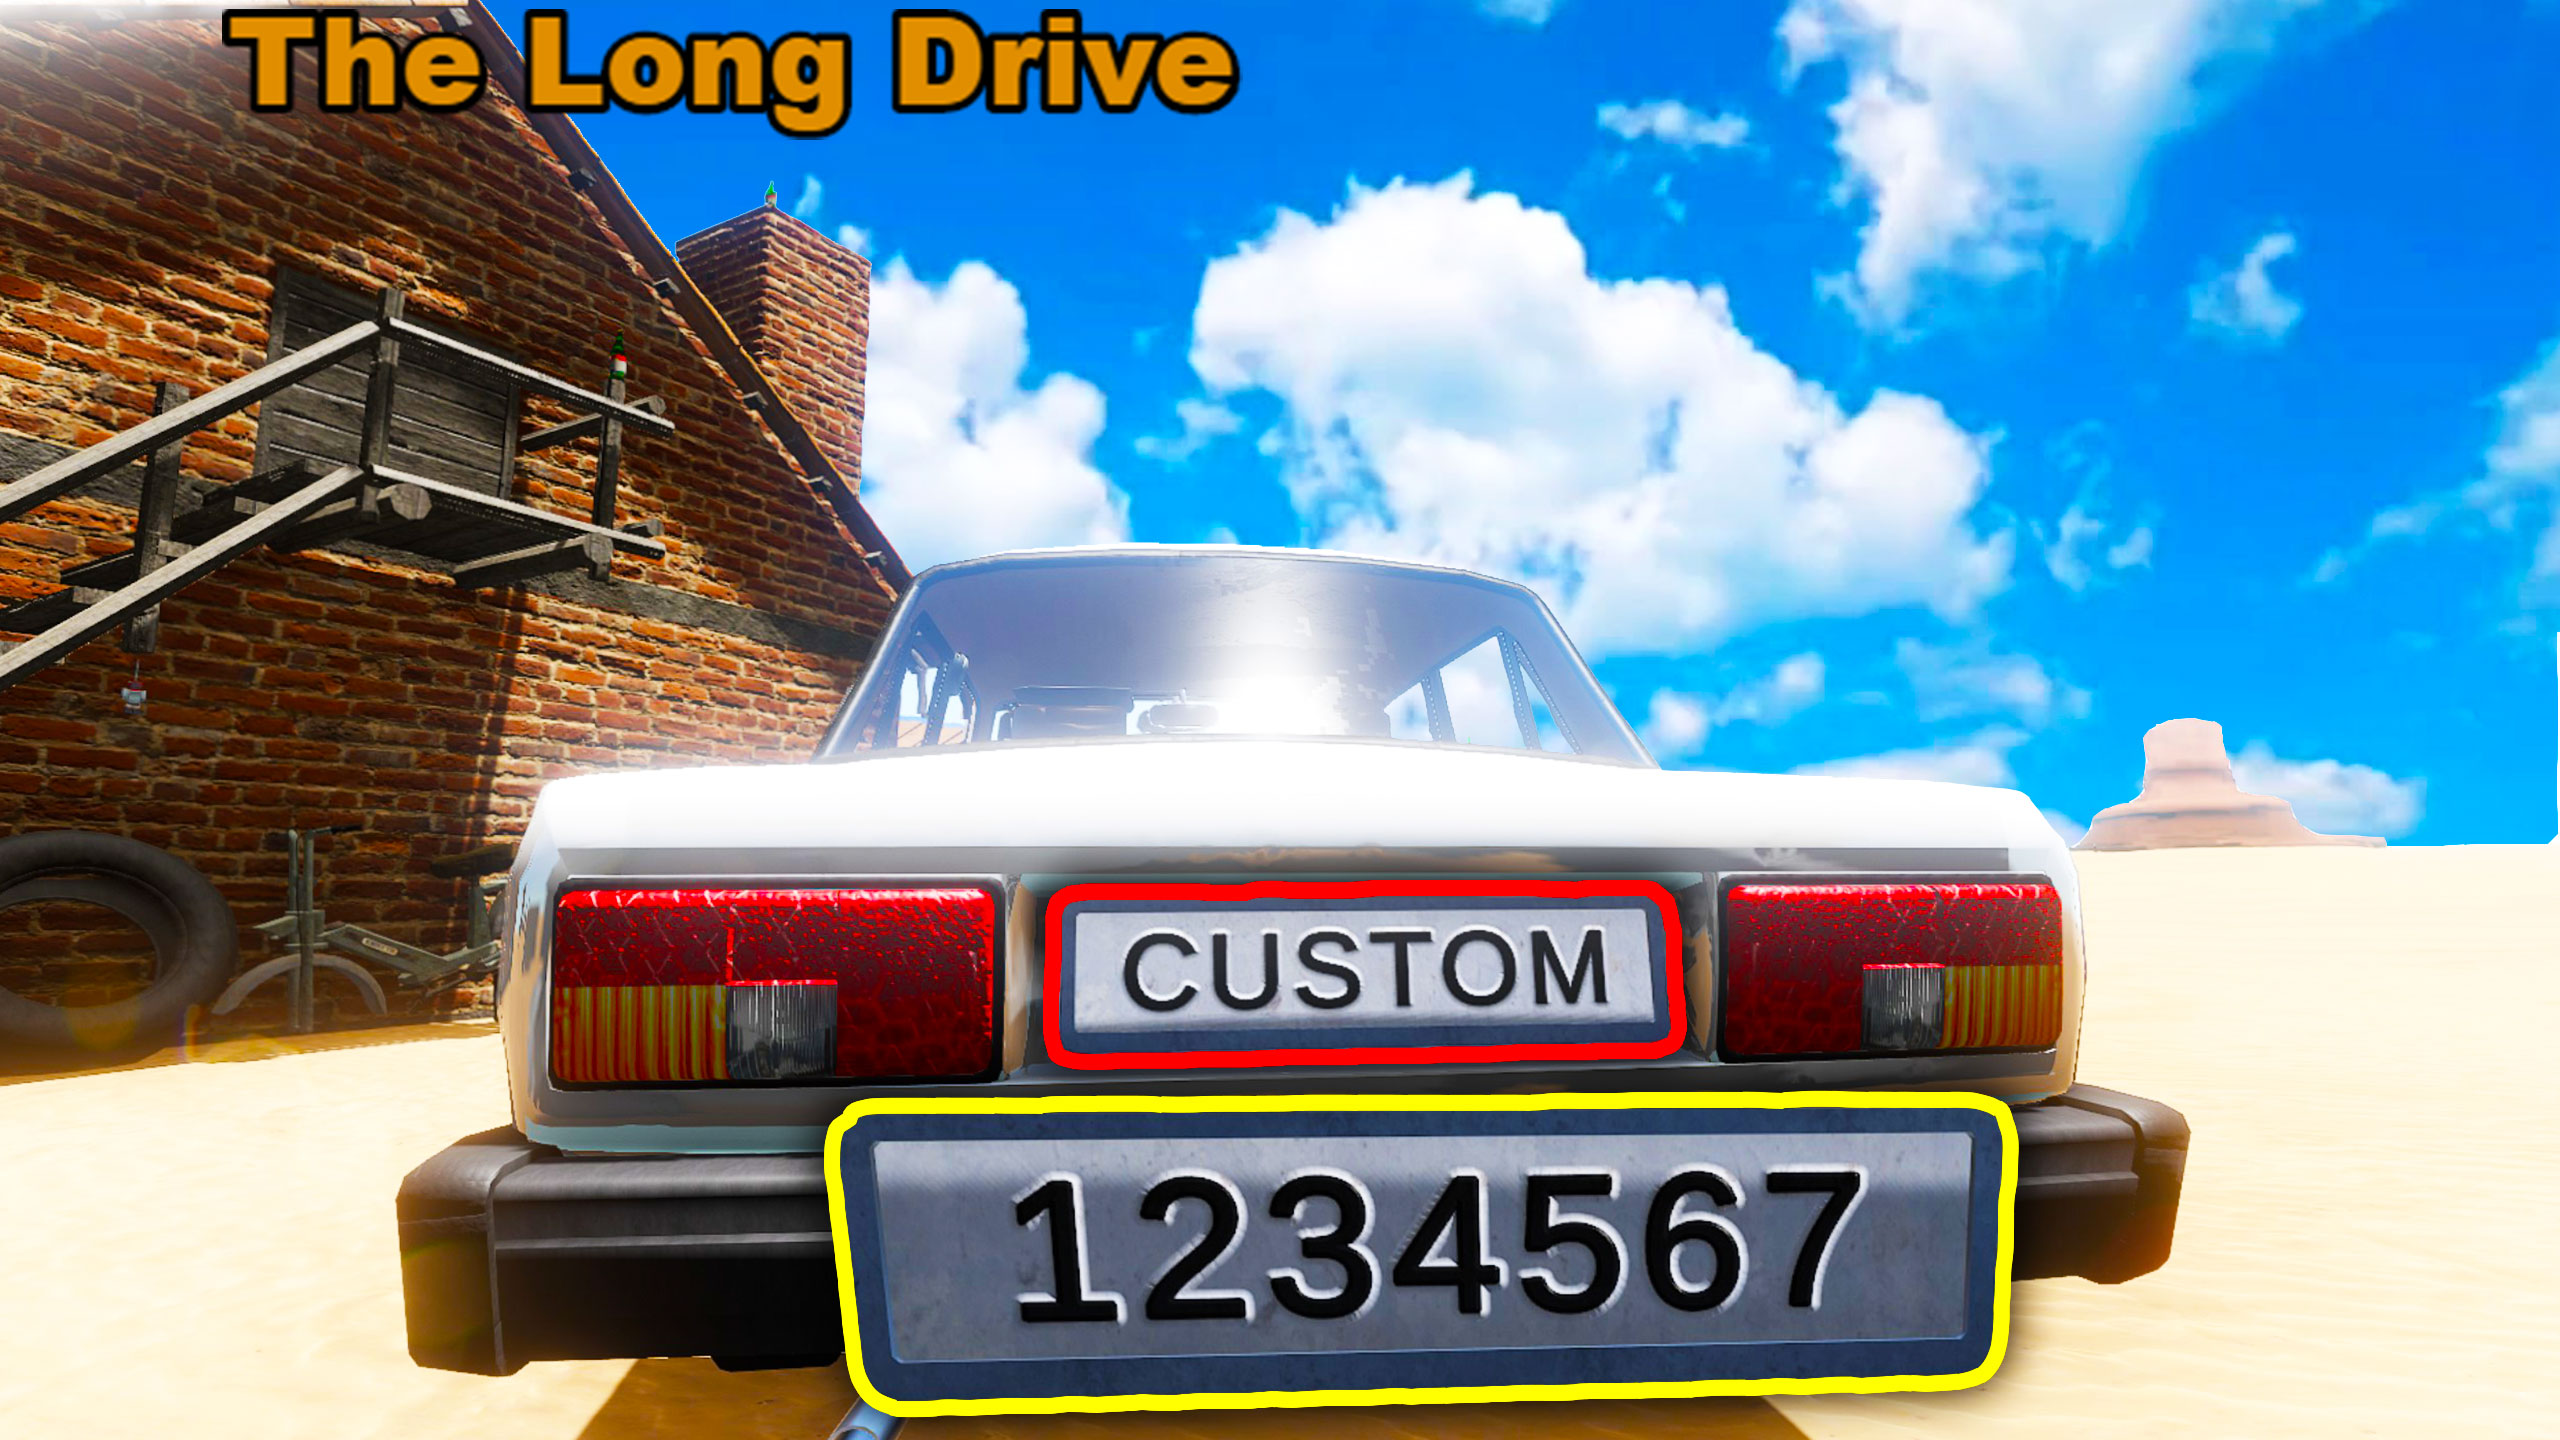 The Long Drive – How to make own license plate